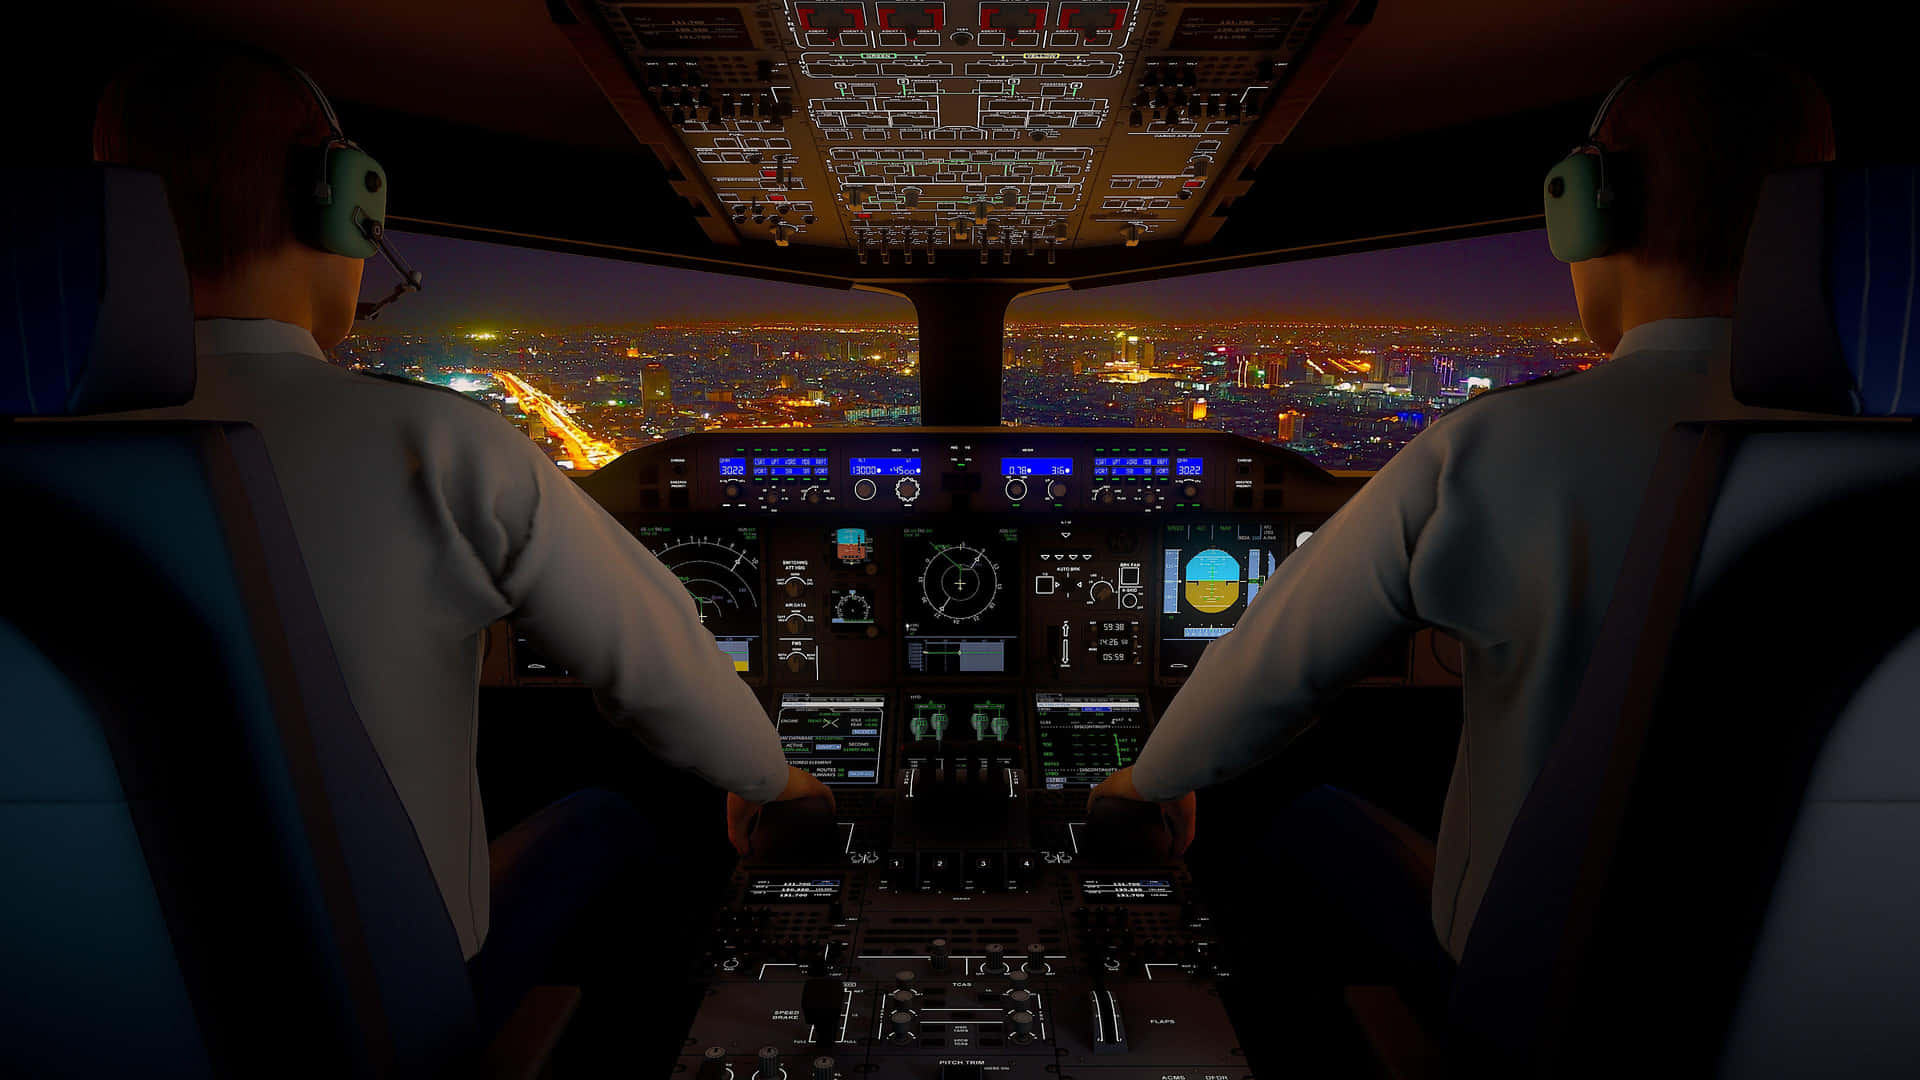 Nighttime Airplane Cockpit View Wallpaper